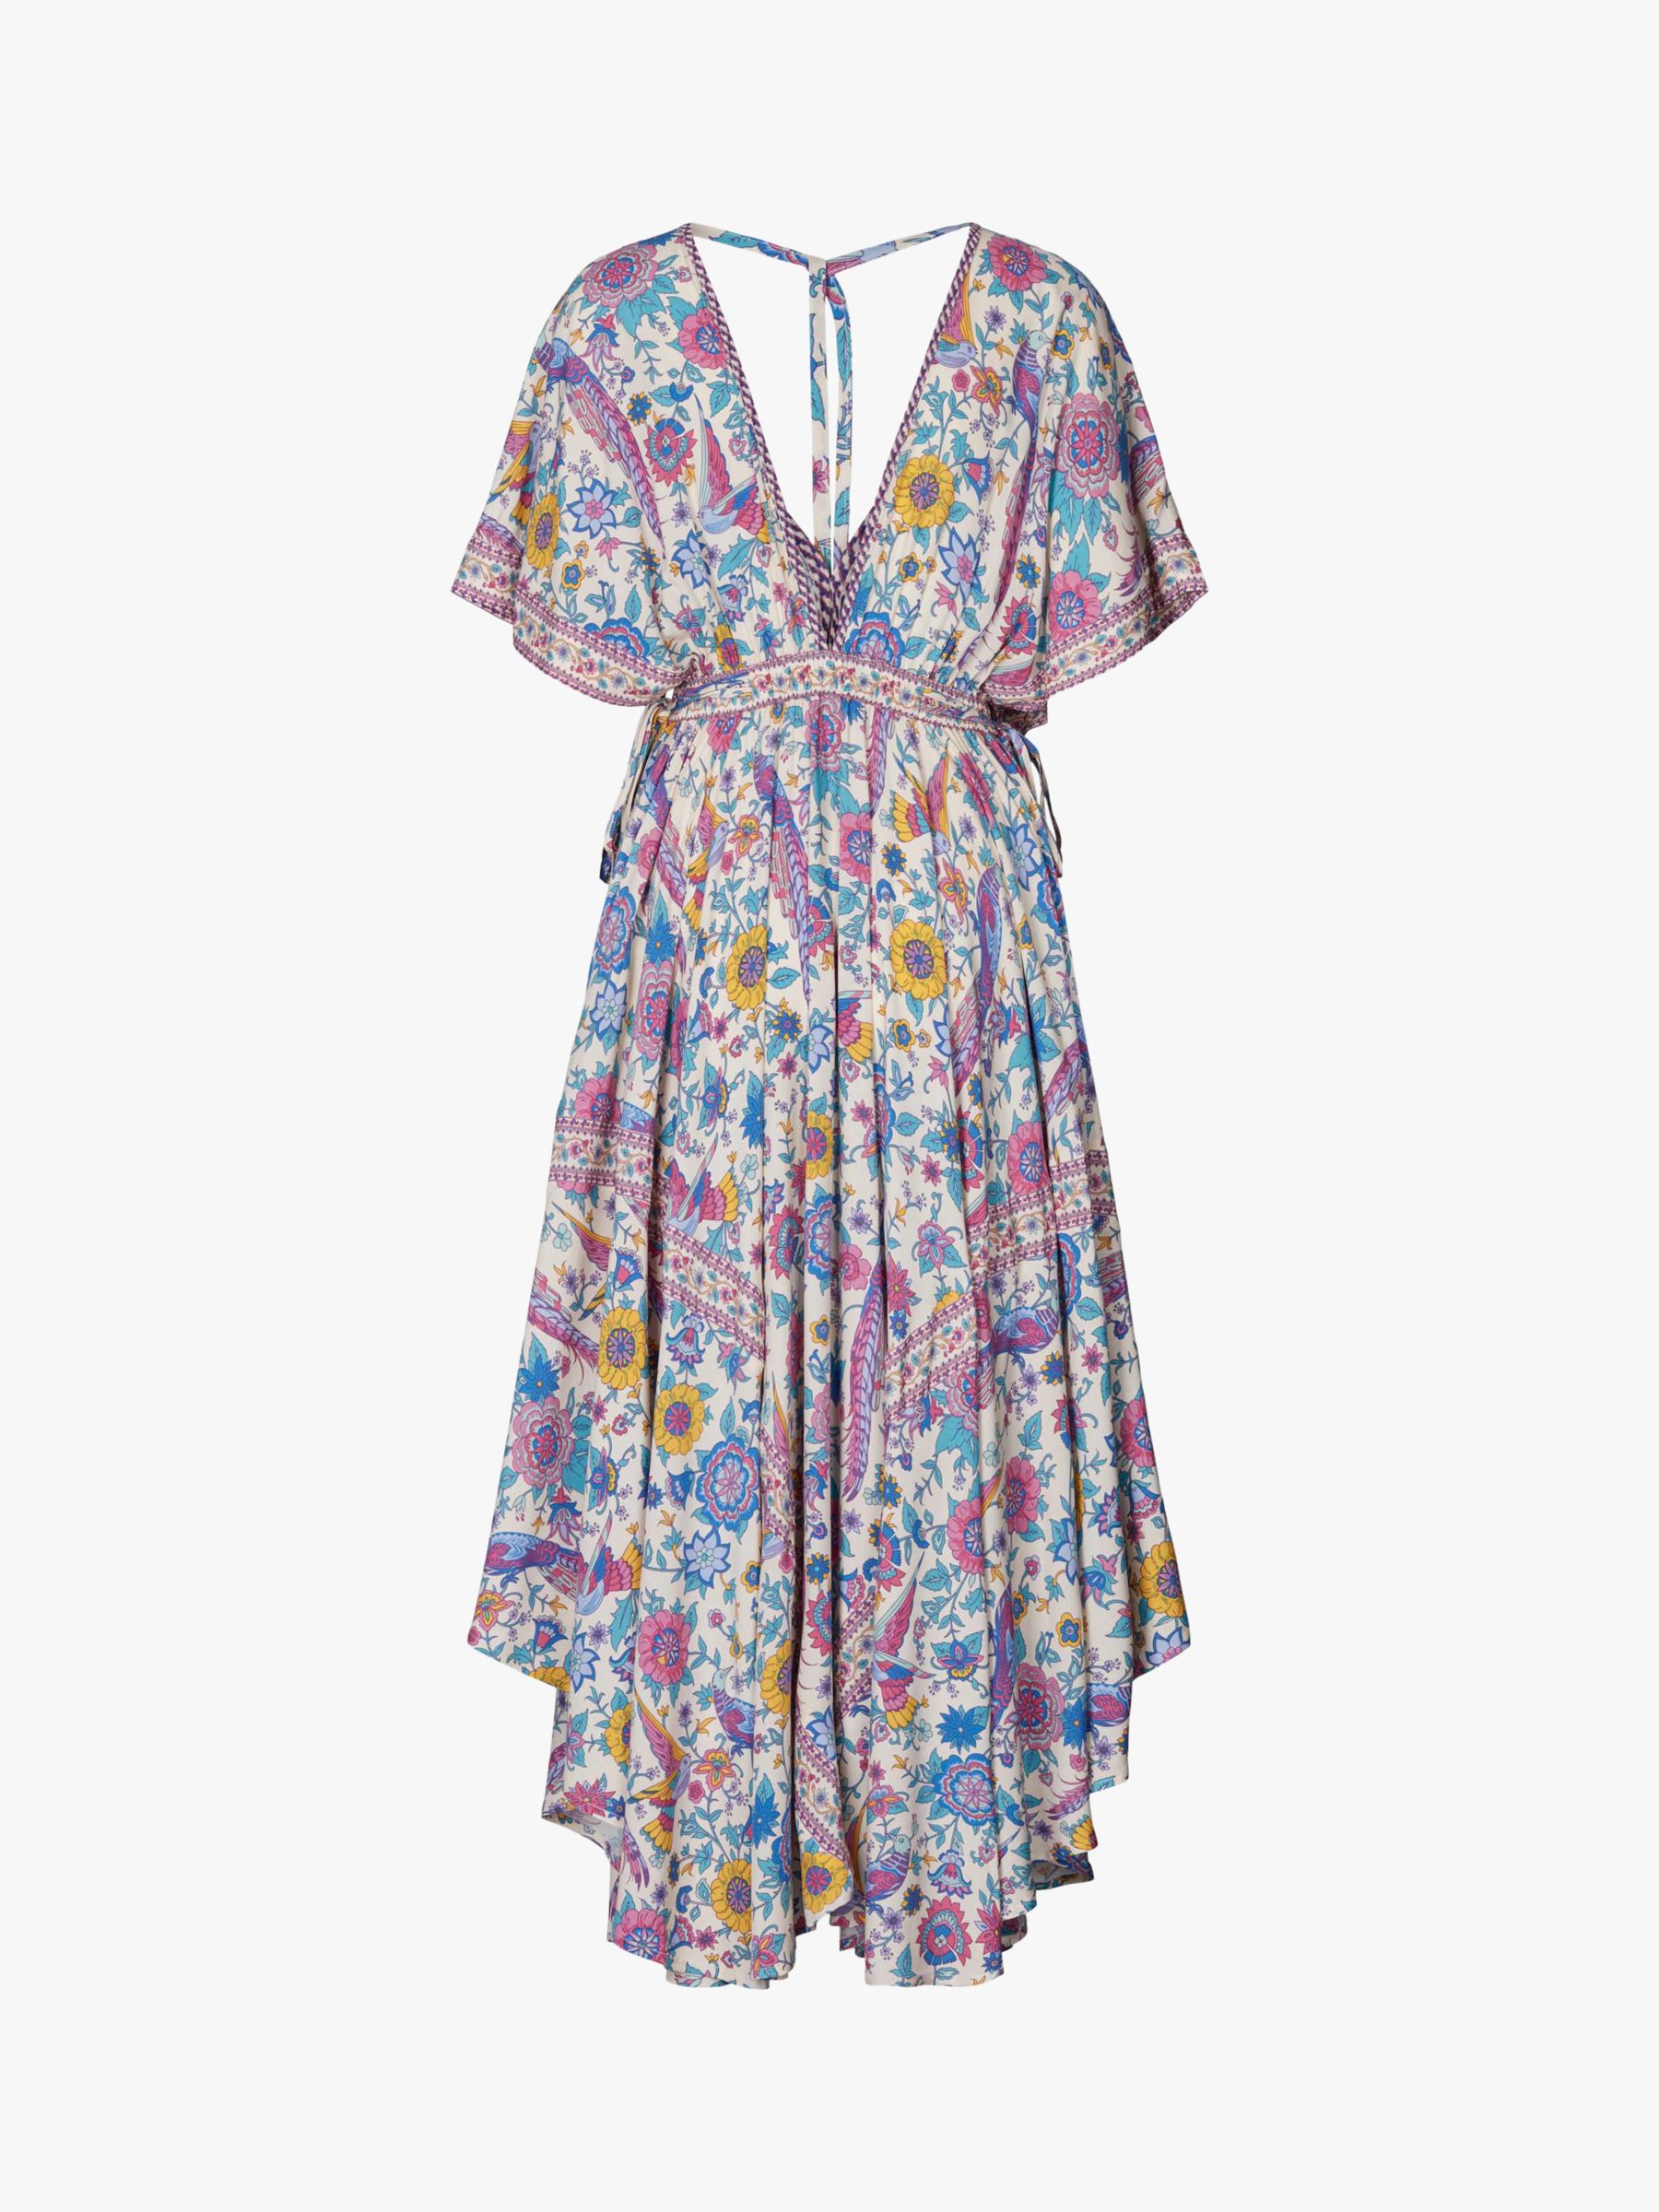 Buy Lollys Laundry Nightingale Floral Dress, Multi Online at johnlewis.com